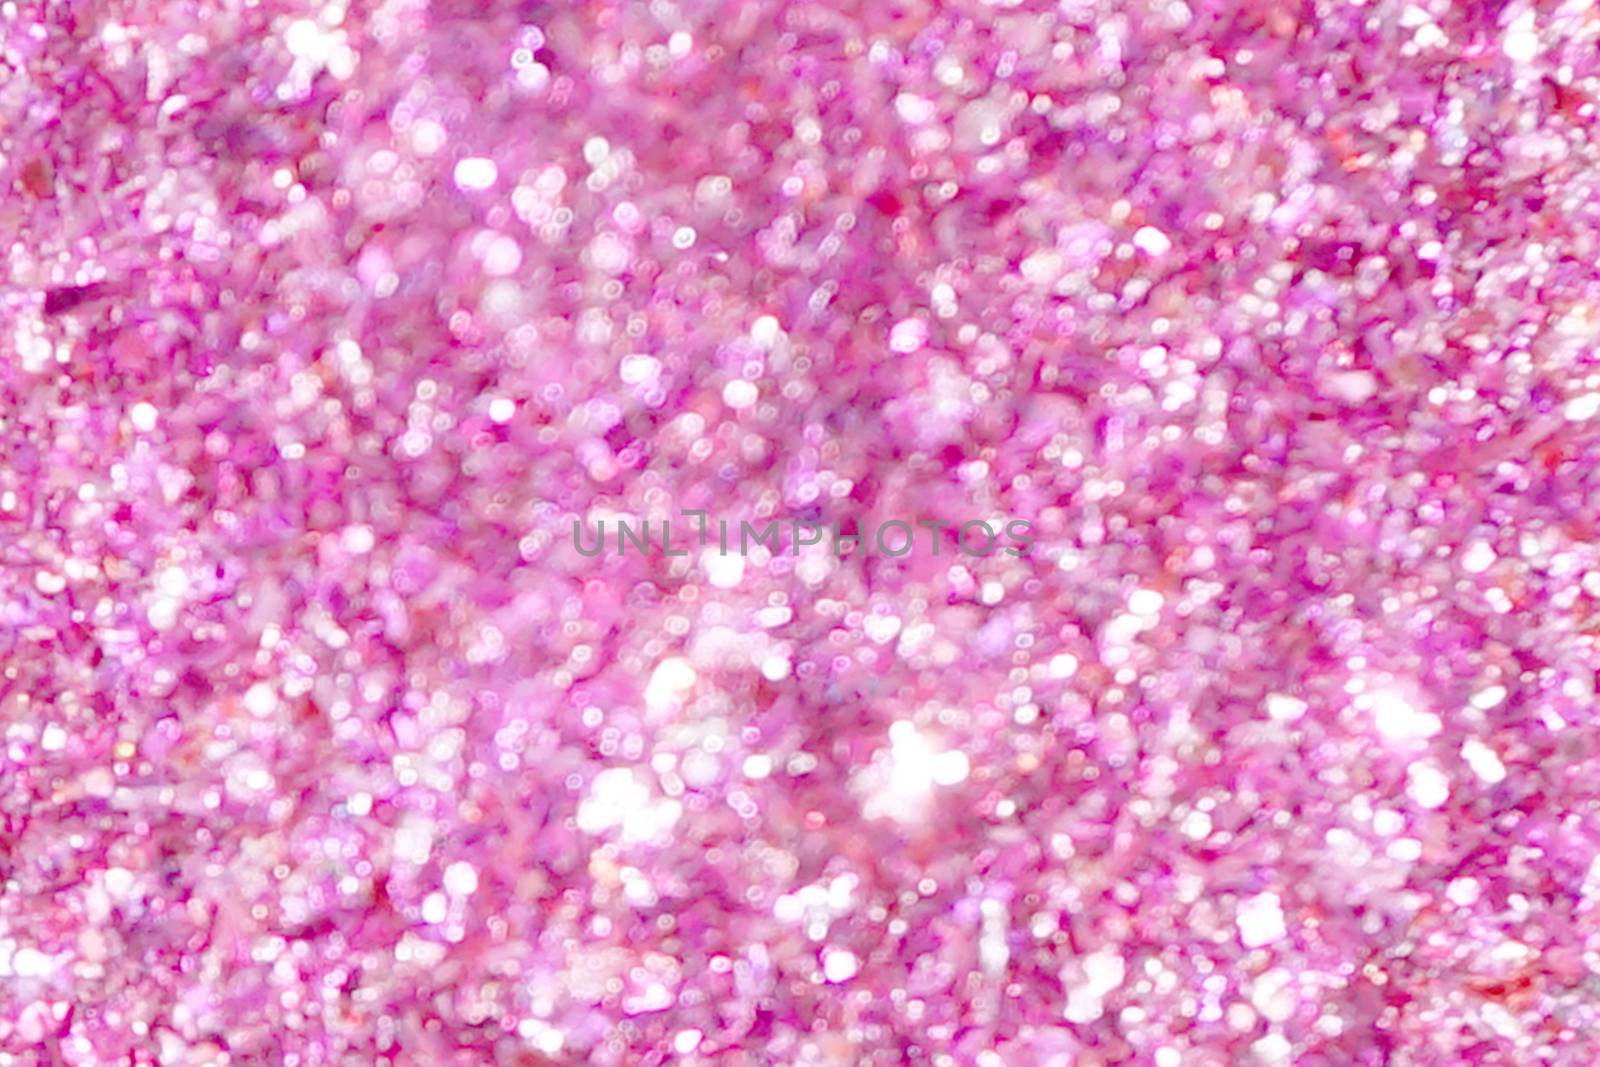 blurred shiny pink abstraction for festive background by Annado